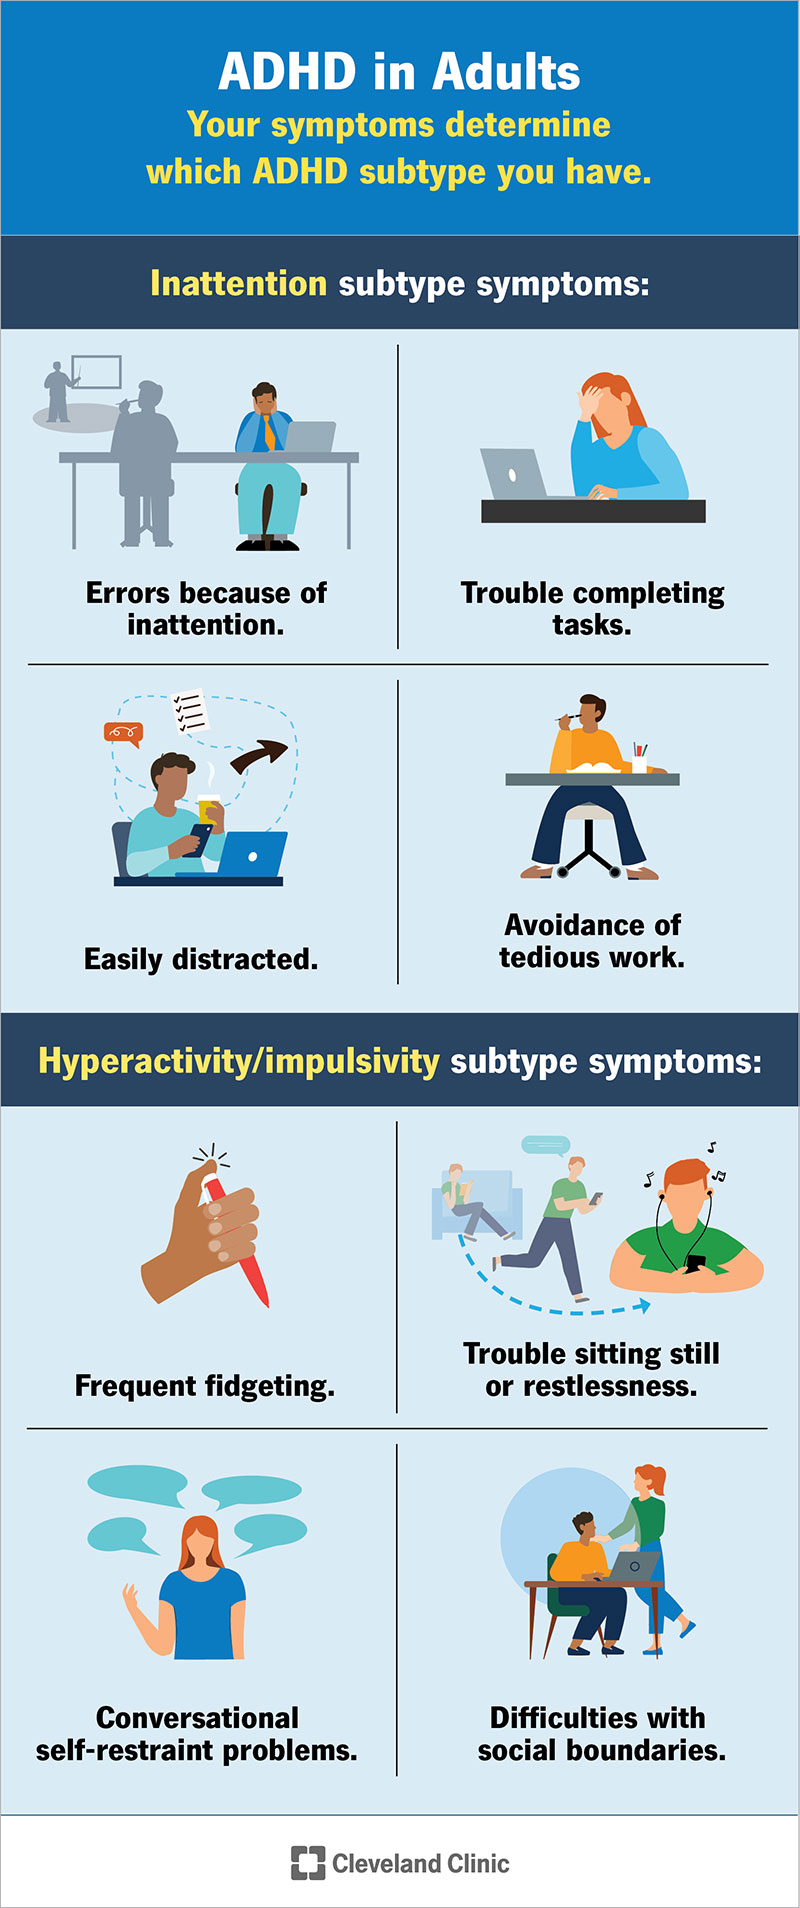 ADHD involves hyperactivity, impulsivity and inattention symptoms, some of which are more common or visible than others.